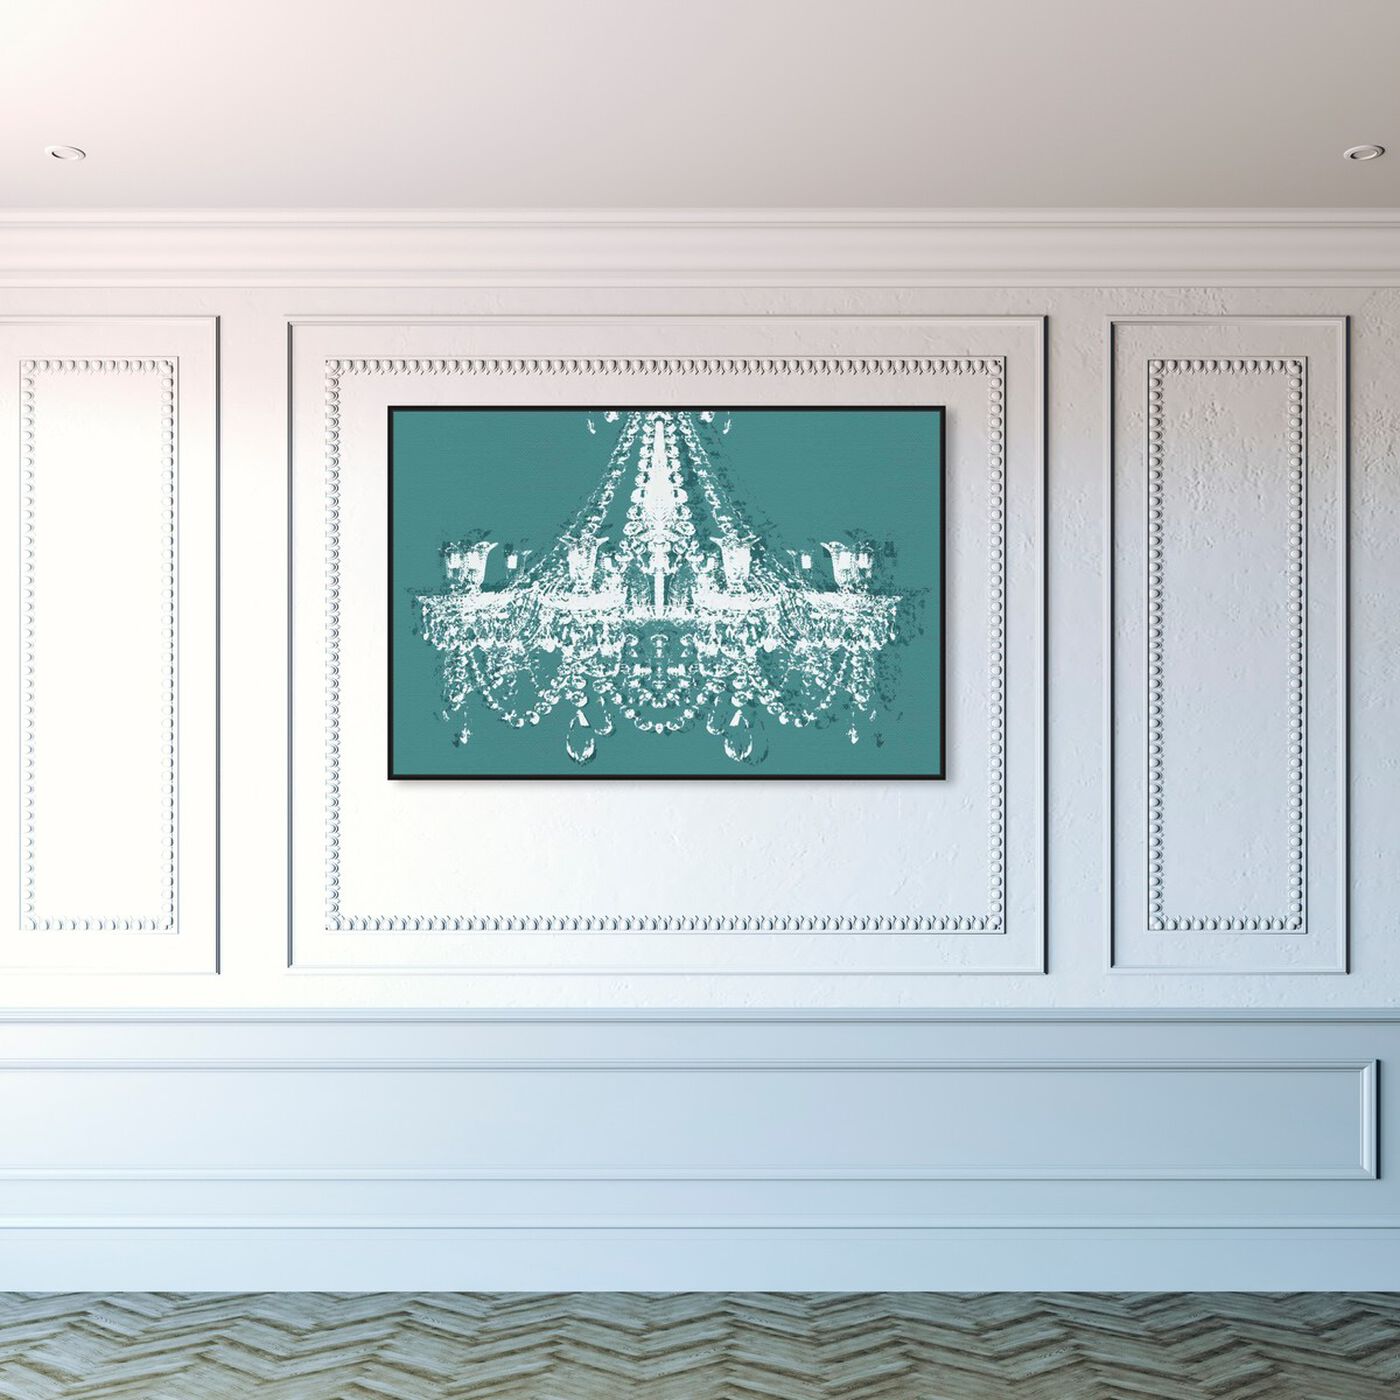 Hanging view of Dramatic Entrance Sarcelle featuring fashion and glam and chandeliers art.